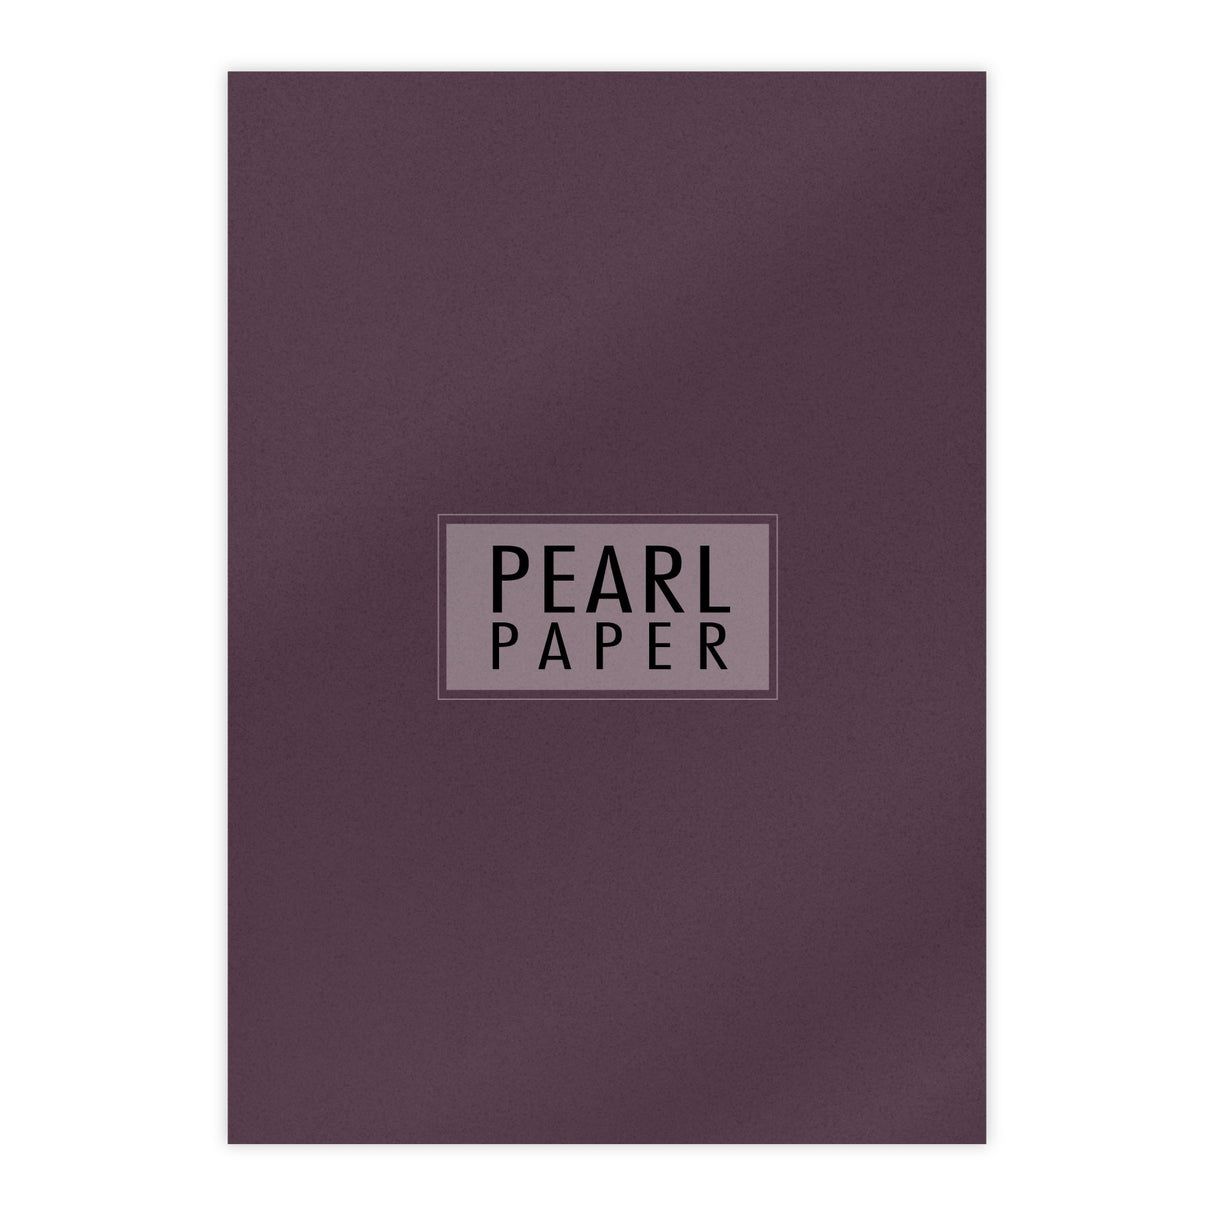 Chloes A4 Luxury Pearl Paper 10 Sheets Ruby